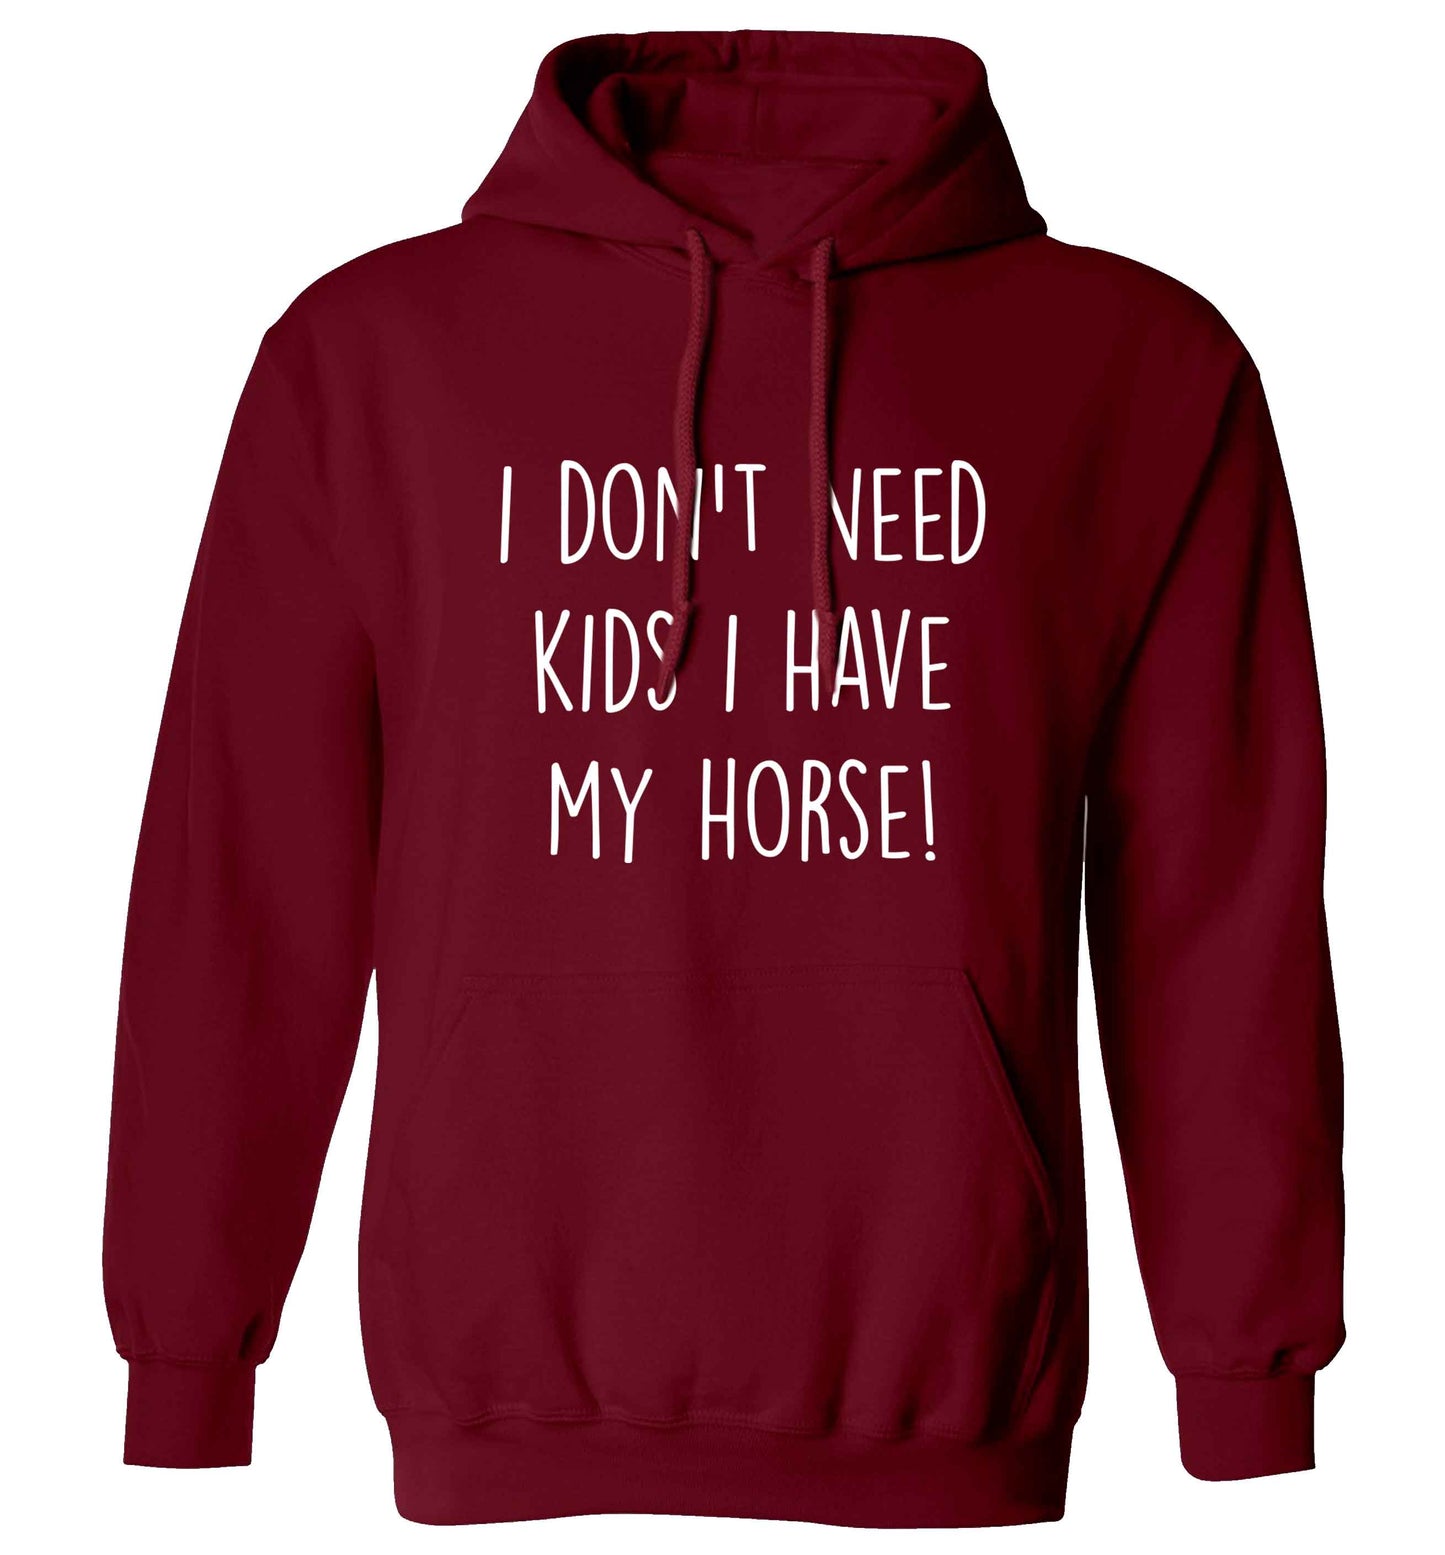 I don't need kids I have my horse adults unisex maroon hoodie 2XL